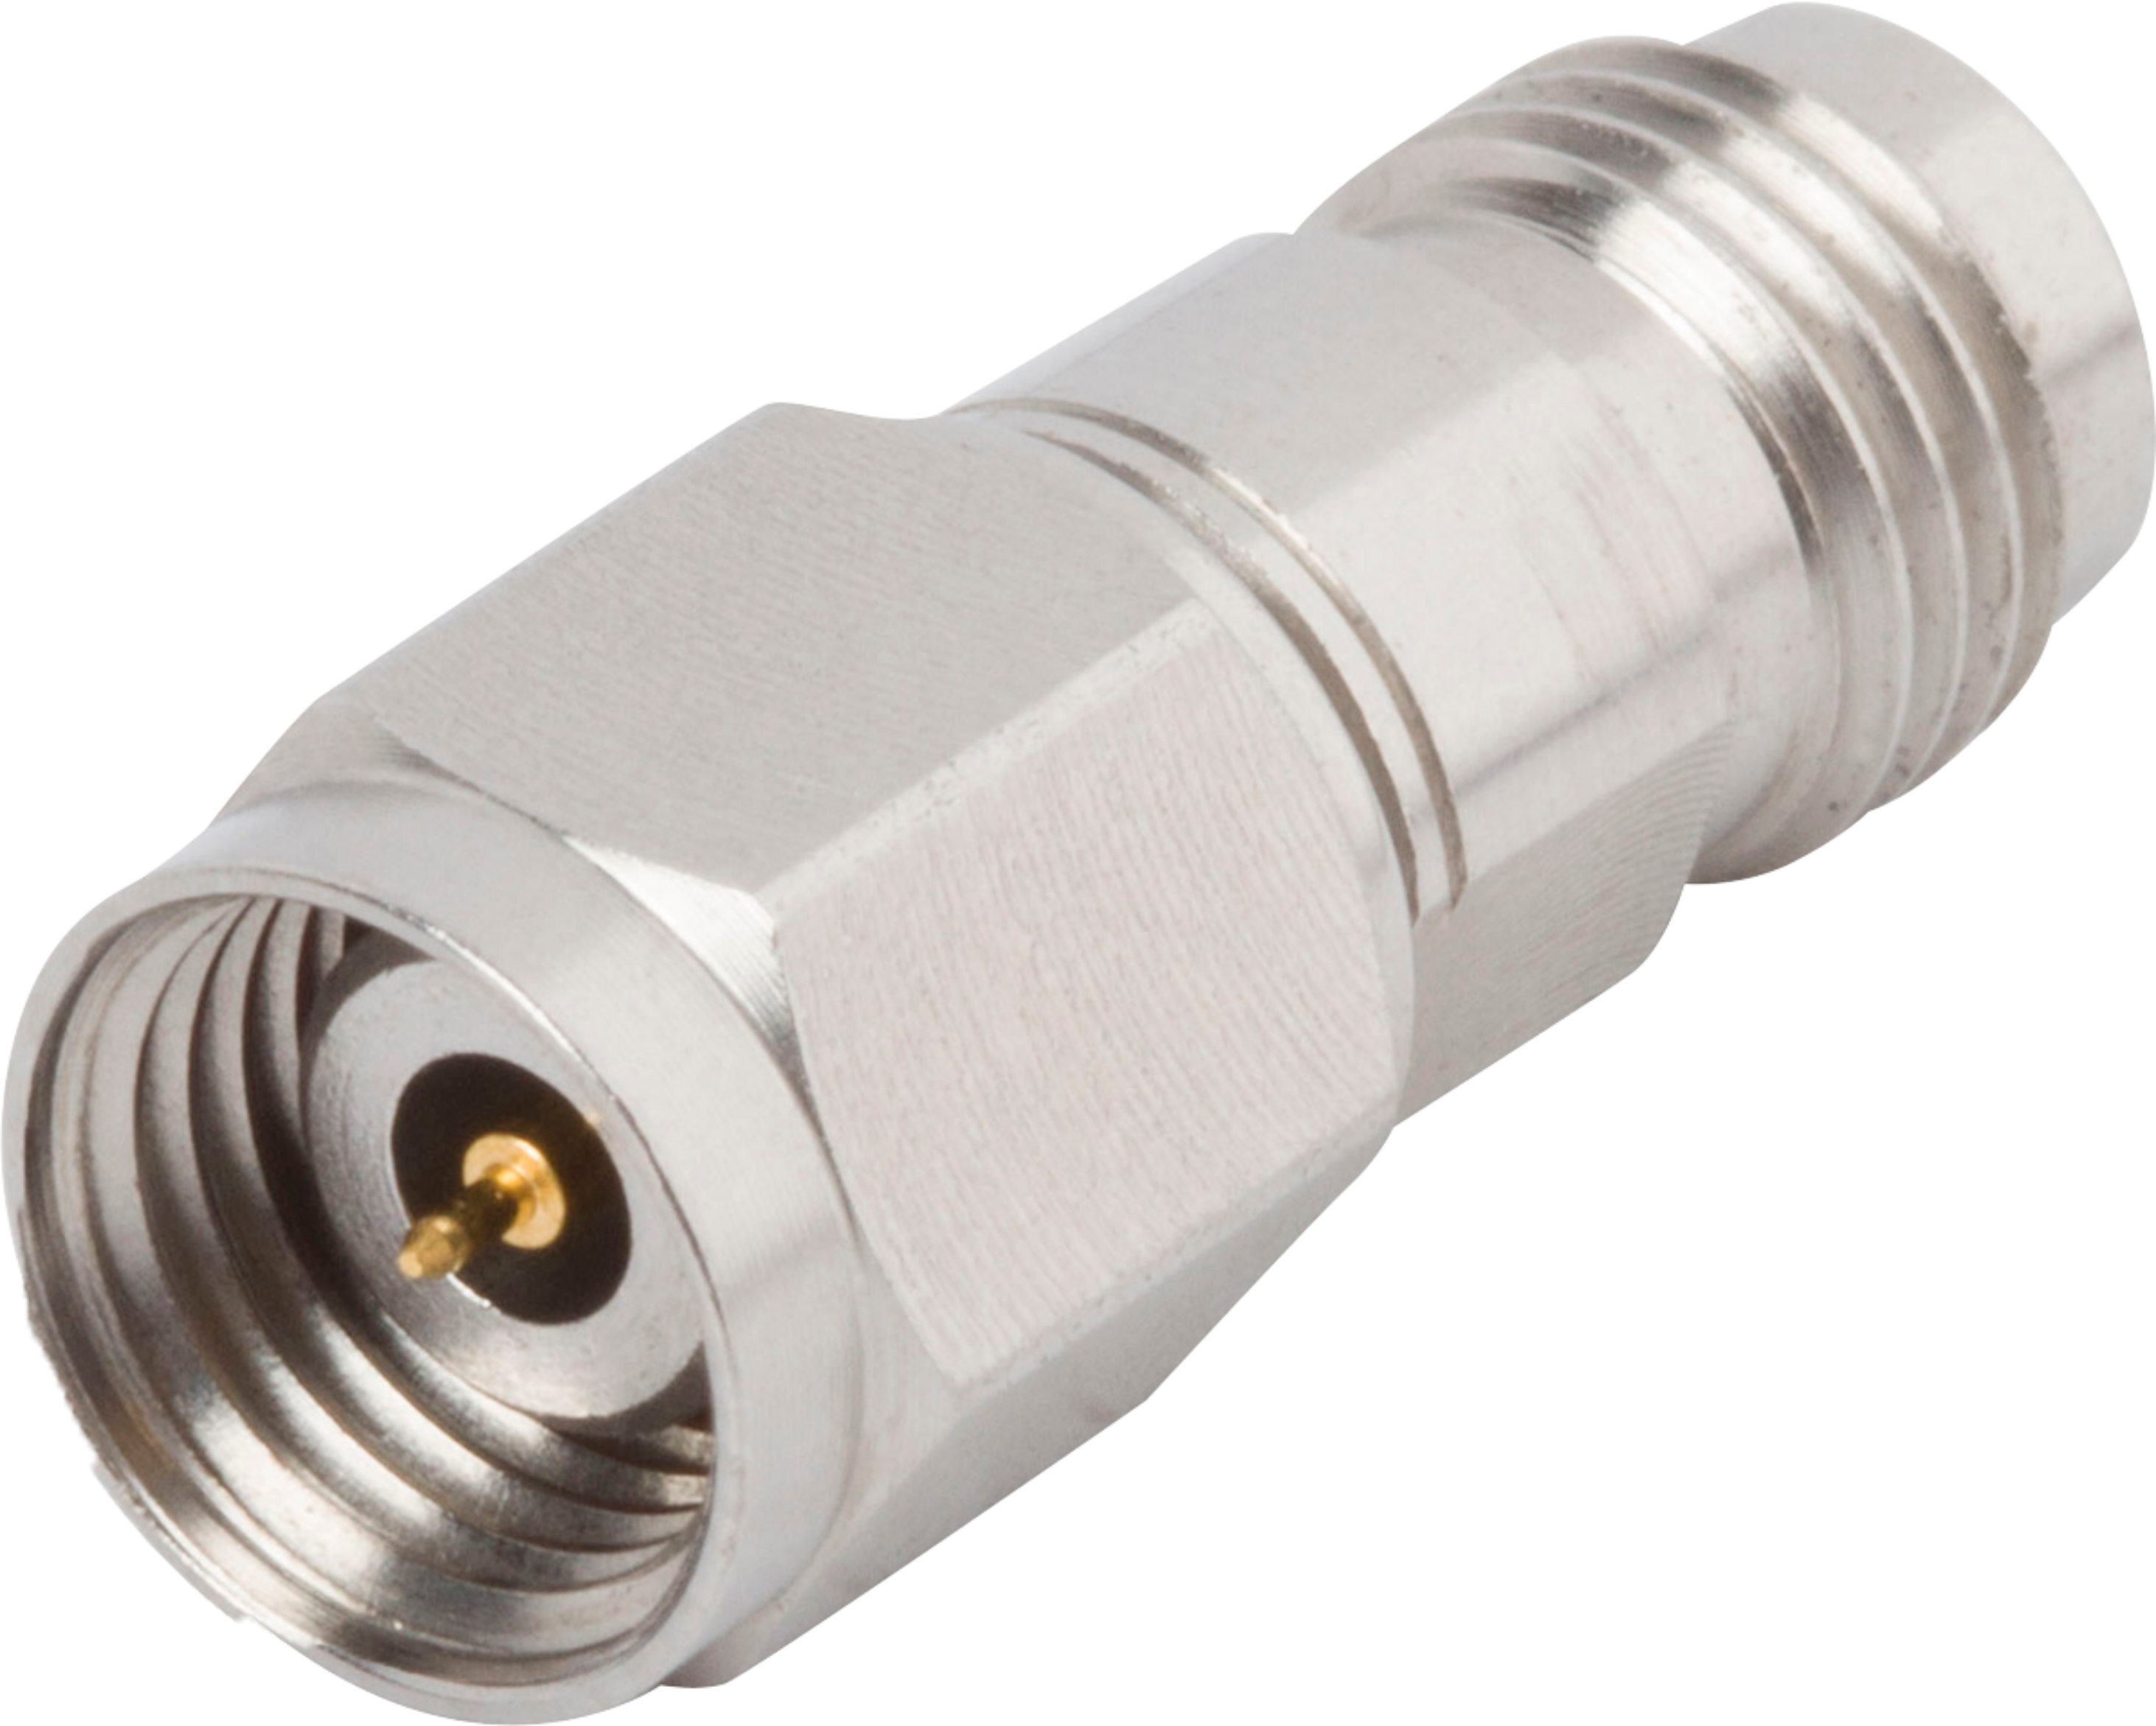 2.92mm Male to 1.85mm Female Adapter, SF1133-6019